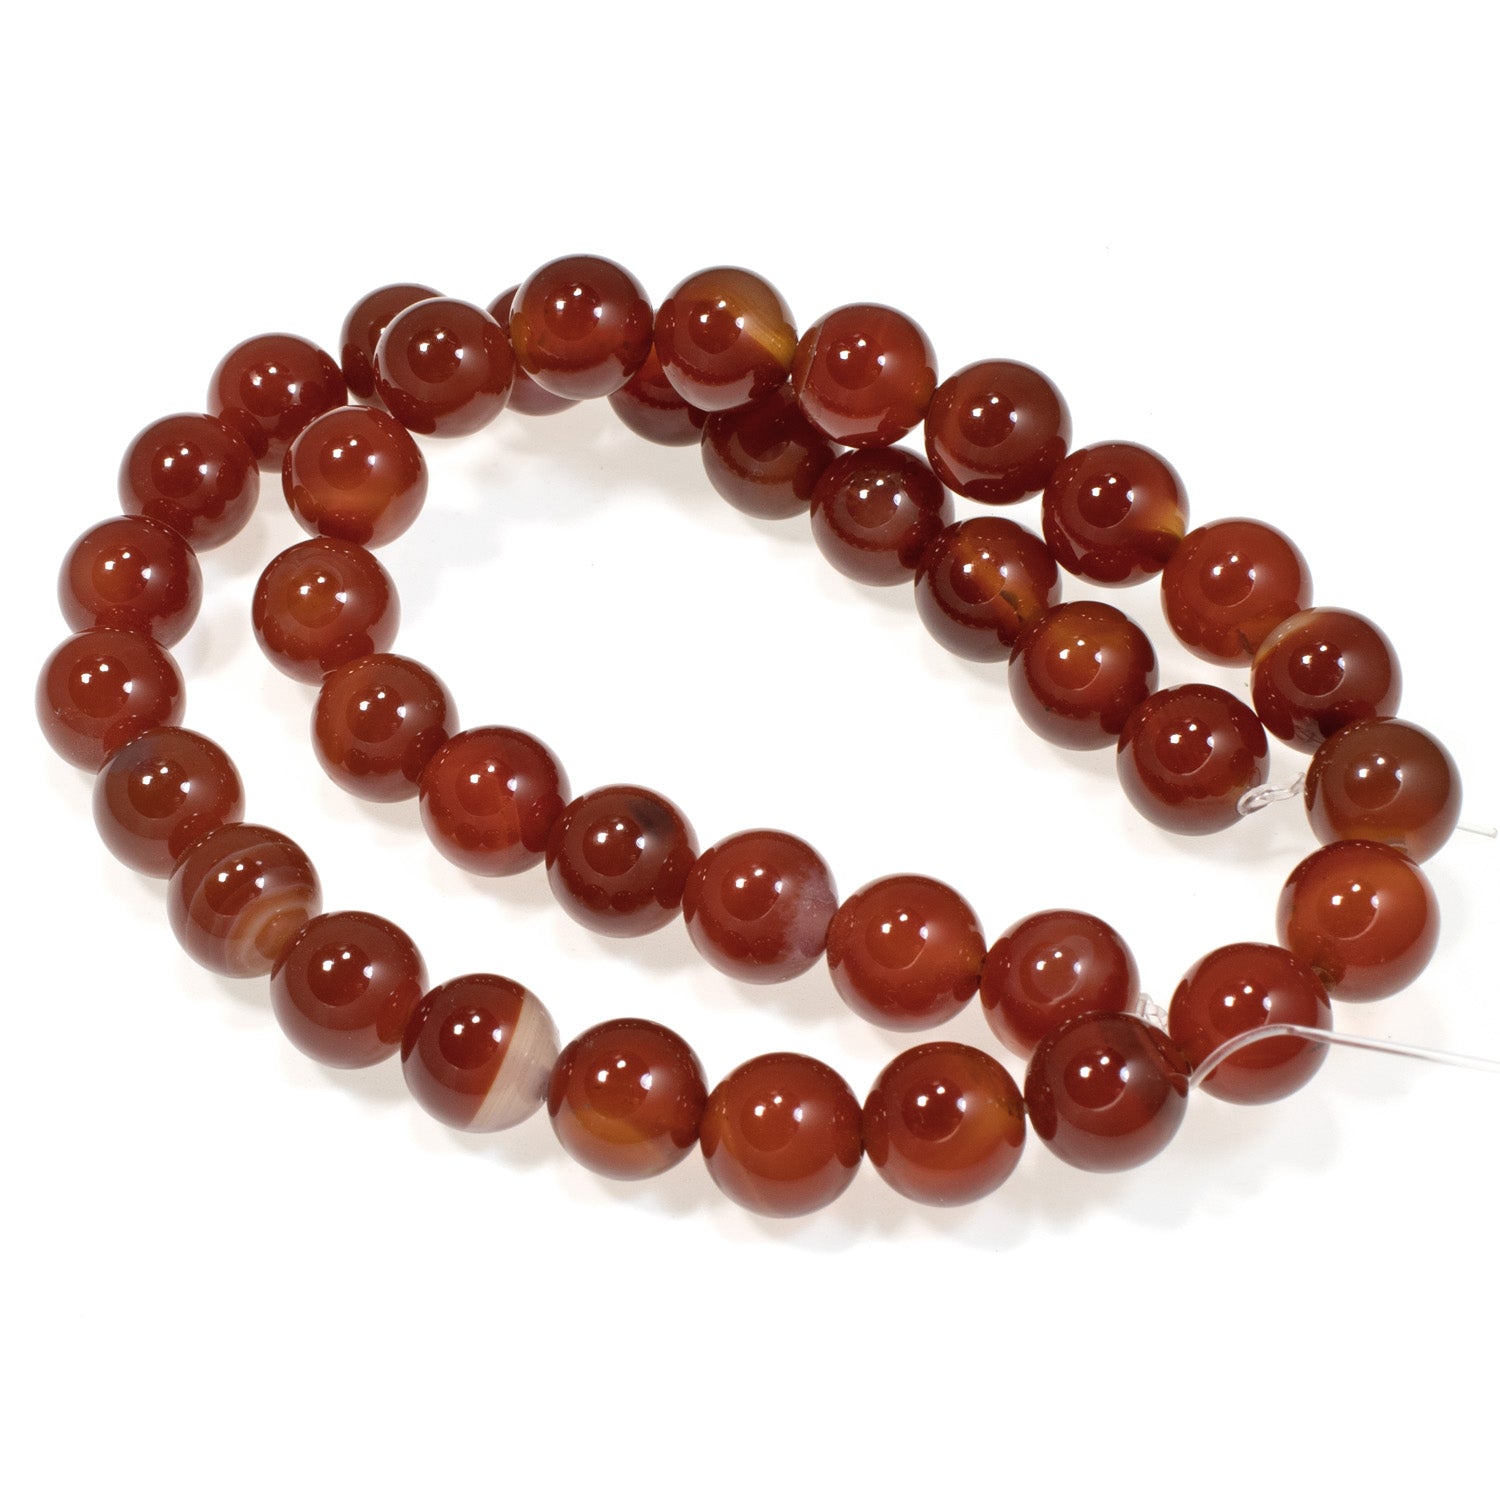 Buy Reiki Crystal Products Natural Certified Carnelian Bracelet Round Beads  10 mm Crystal Stone Bracelet for Reiki Healing and Crystal Healing Stones  (Color : Orange/Red) For Unisex Adult at Amazon.in